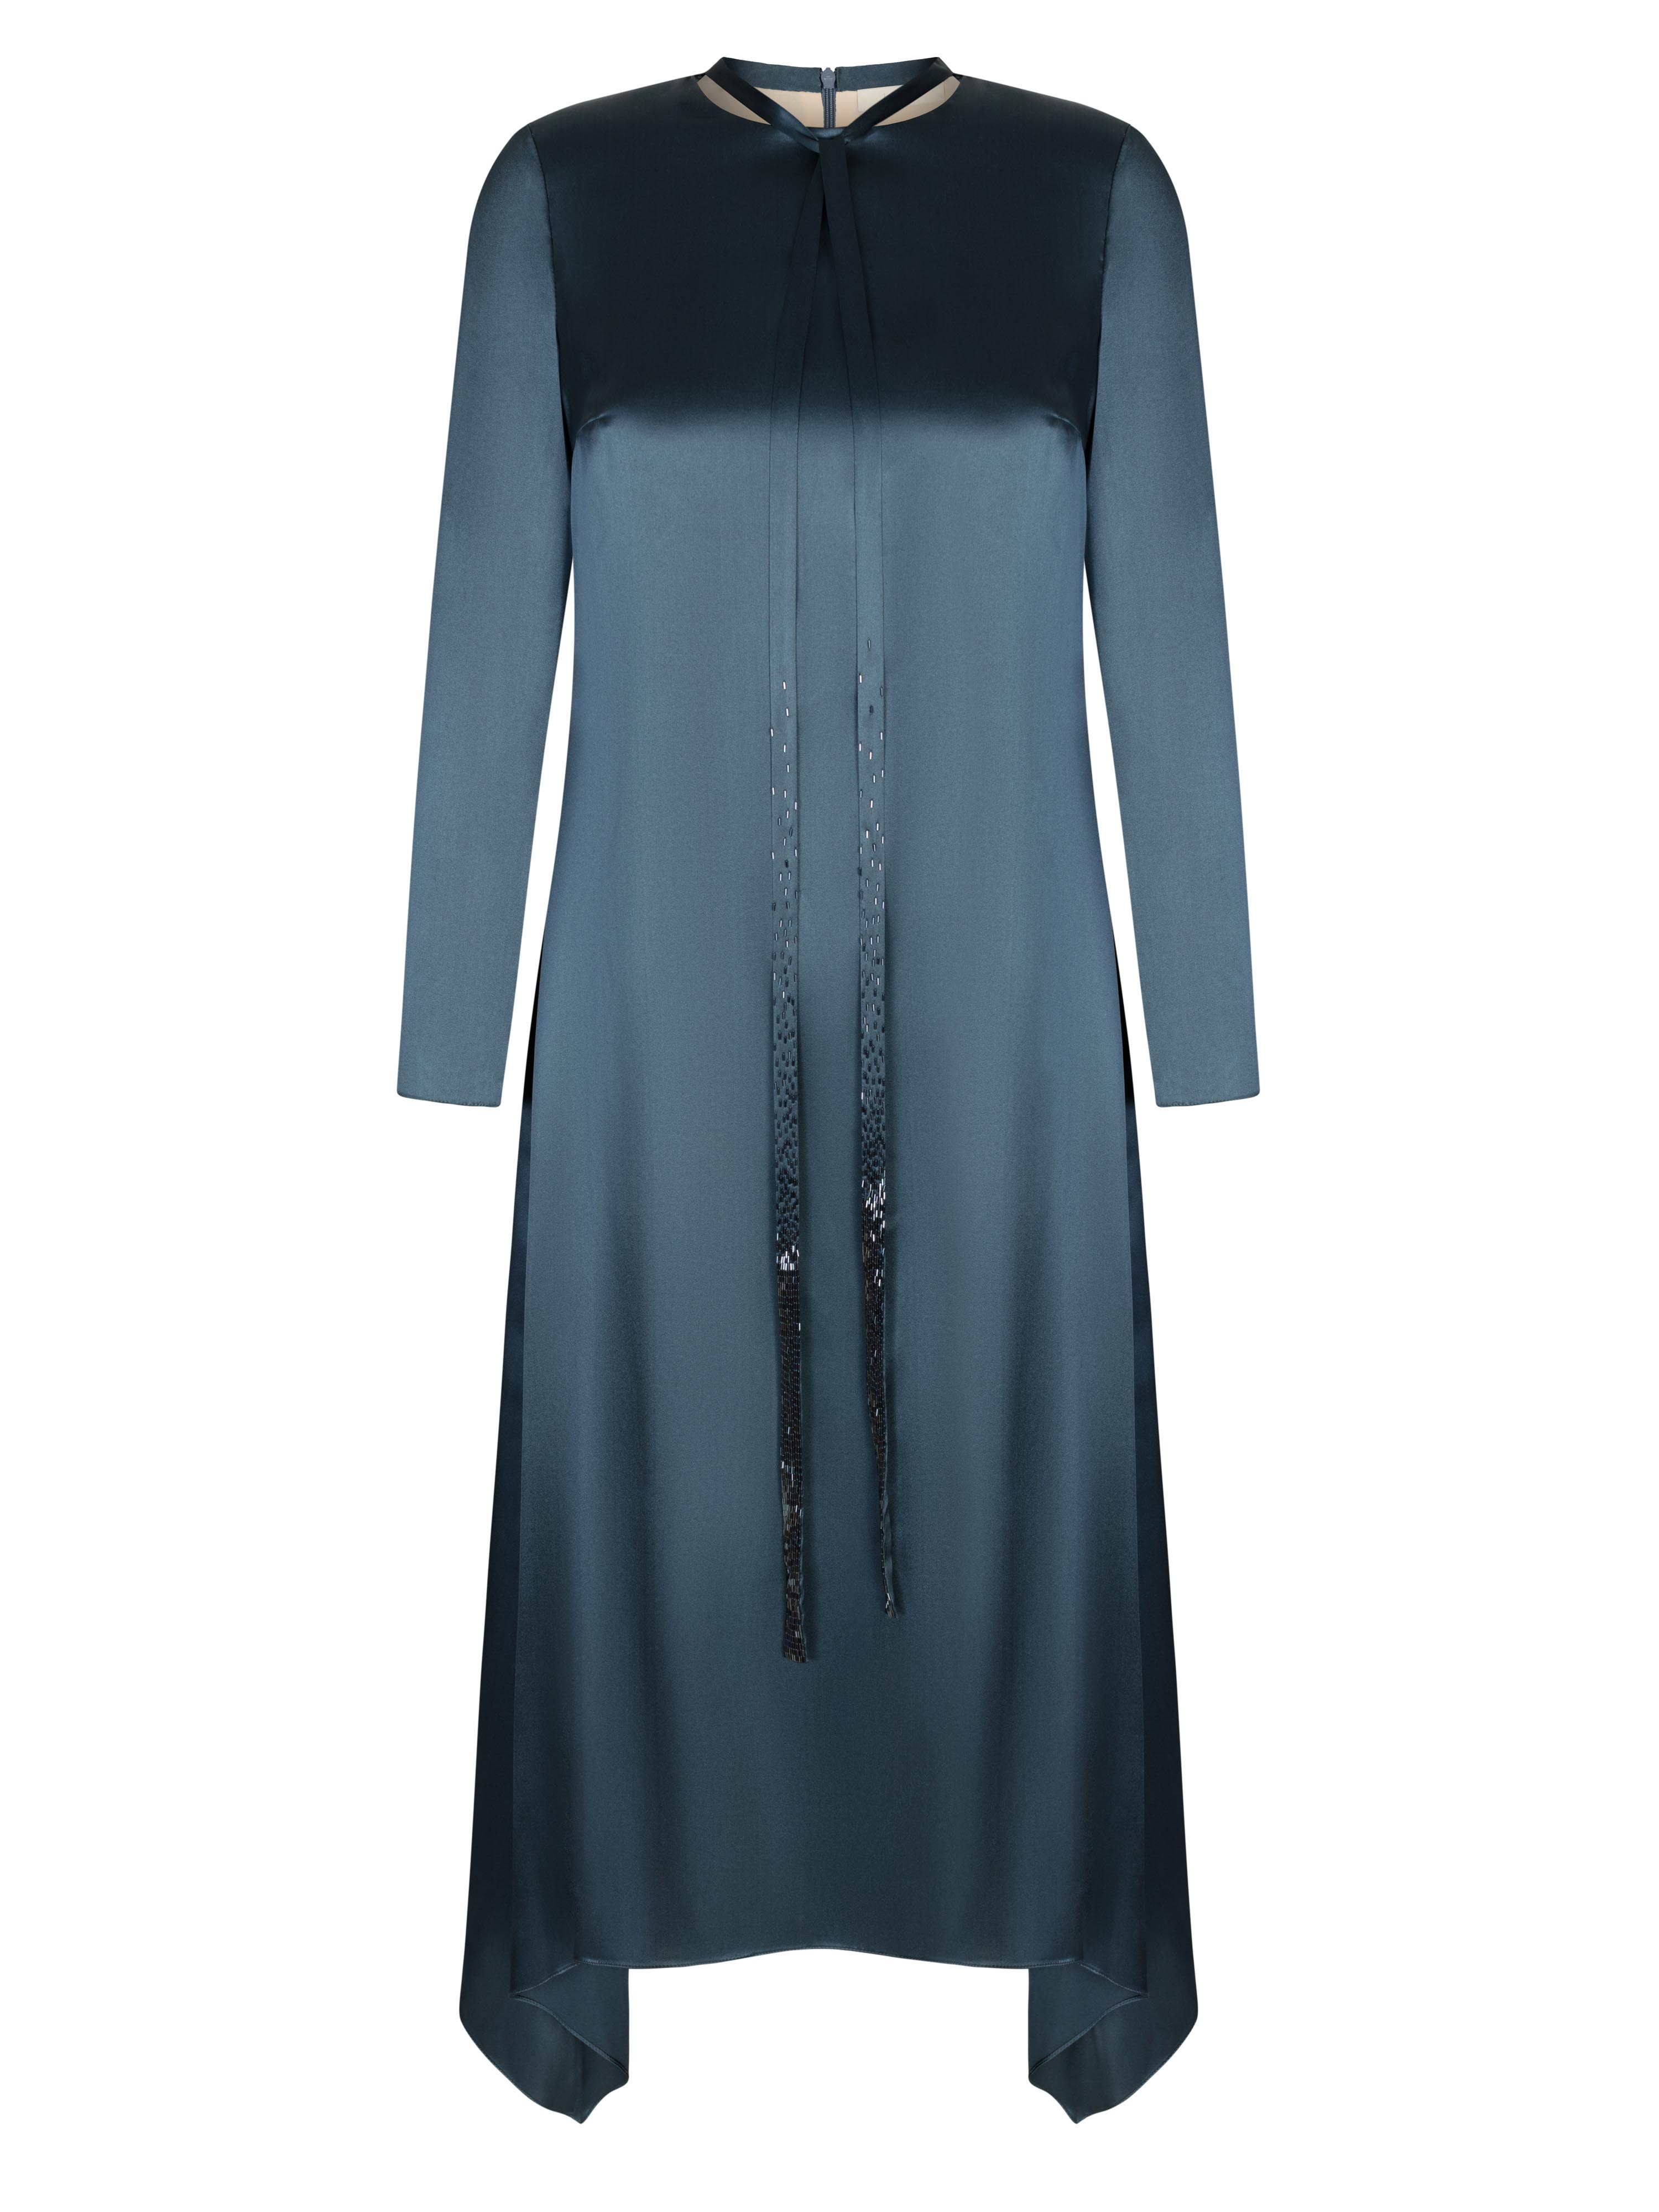 LILY BLUE NIGHT DRESS WITH EMBROIDERY